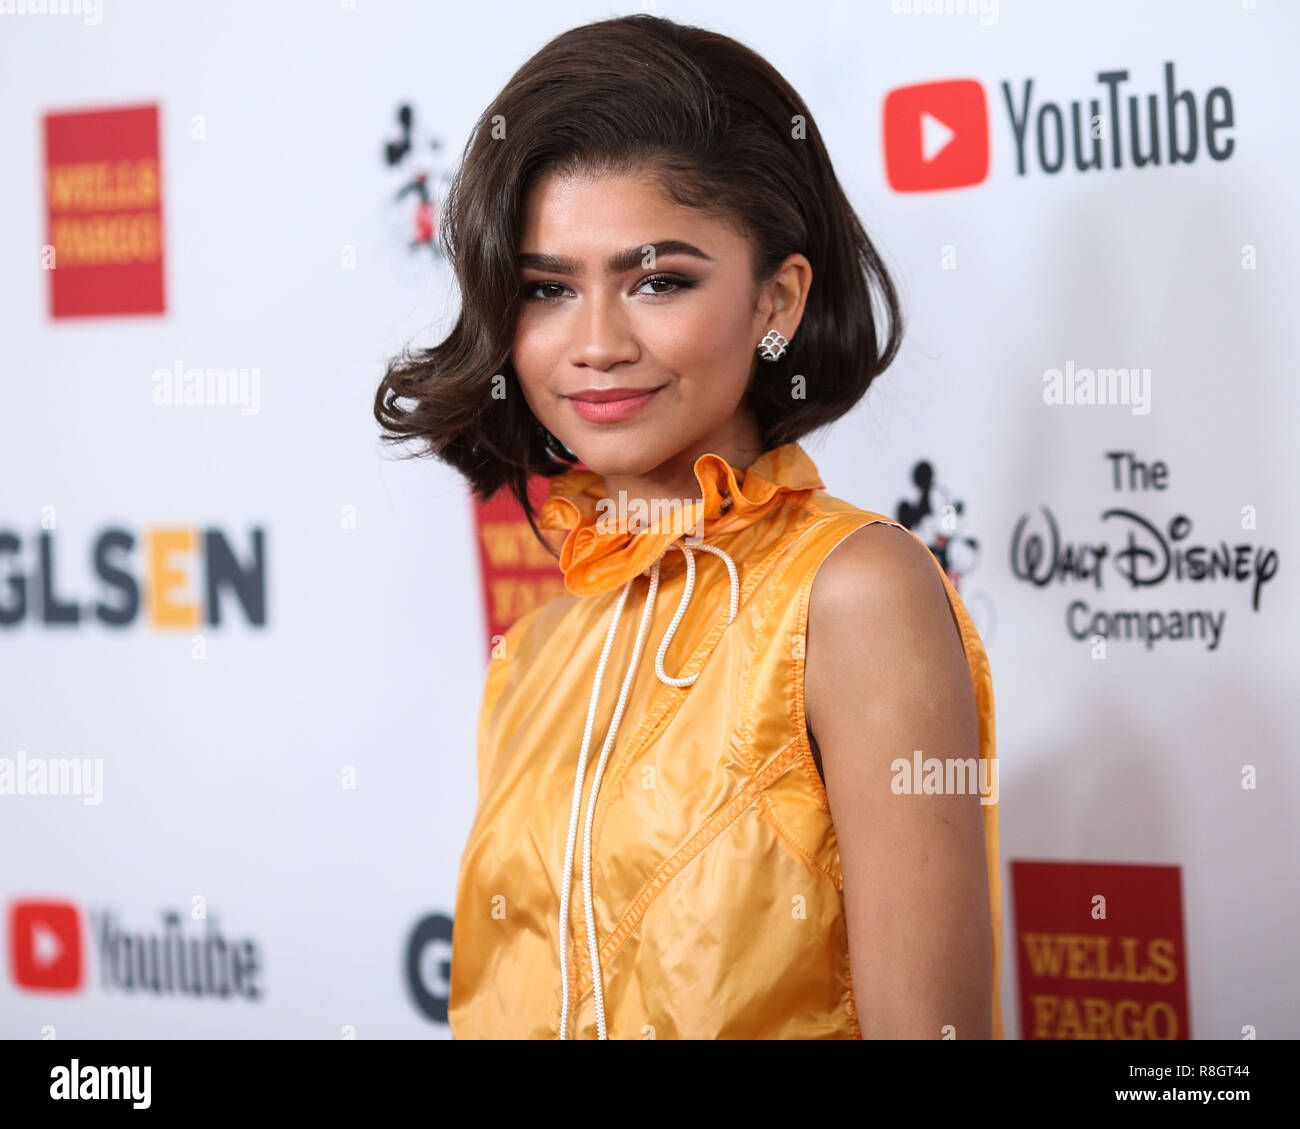 BEVERLY HILLS, LOS ANGELES, CA, USA - OCTOBER 20: Actress Zendaya wearing Calvin Klein with a Bulgari ring arrives at the 2017 GLSEN Respect Awards held at the Beverly Wilshire Four Seasons Hotel on October 20, 2017 in Beverly Hills, Los Angeles, California, United States. (Photo by Xavier Collin/Image Press Agency) Stock Photo